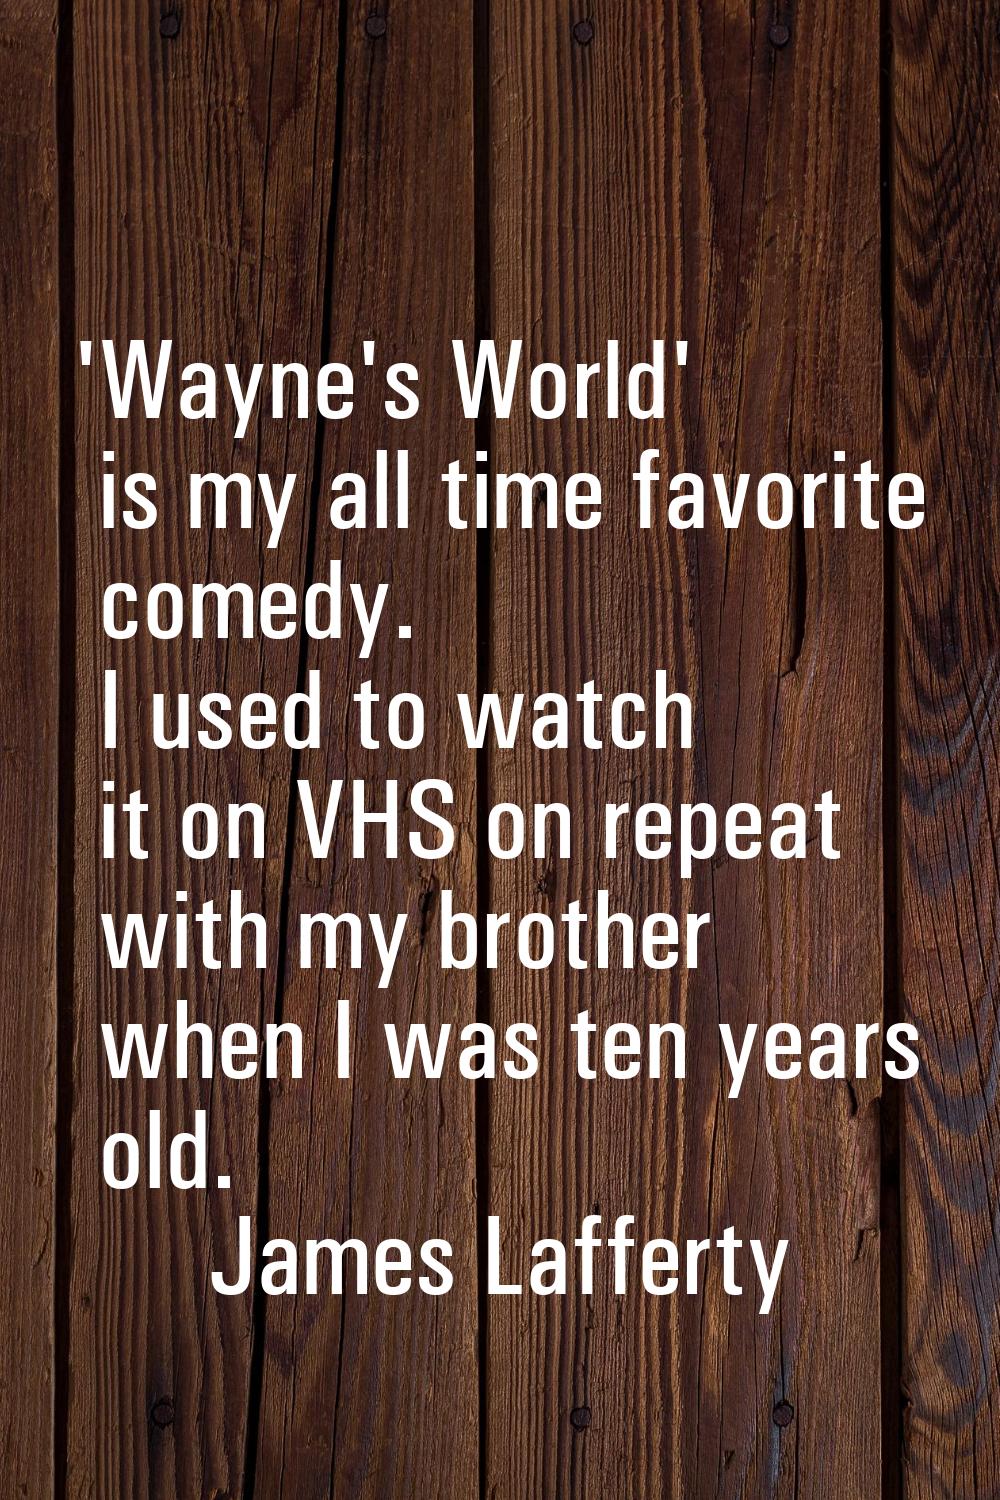 'Wayne's World' is my all time favorite comedy. I used to watch it on VHS on repeat with my brother